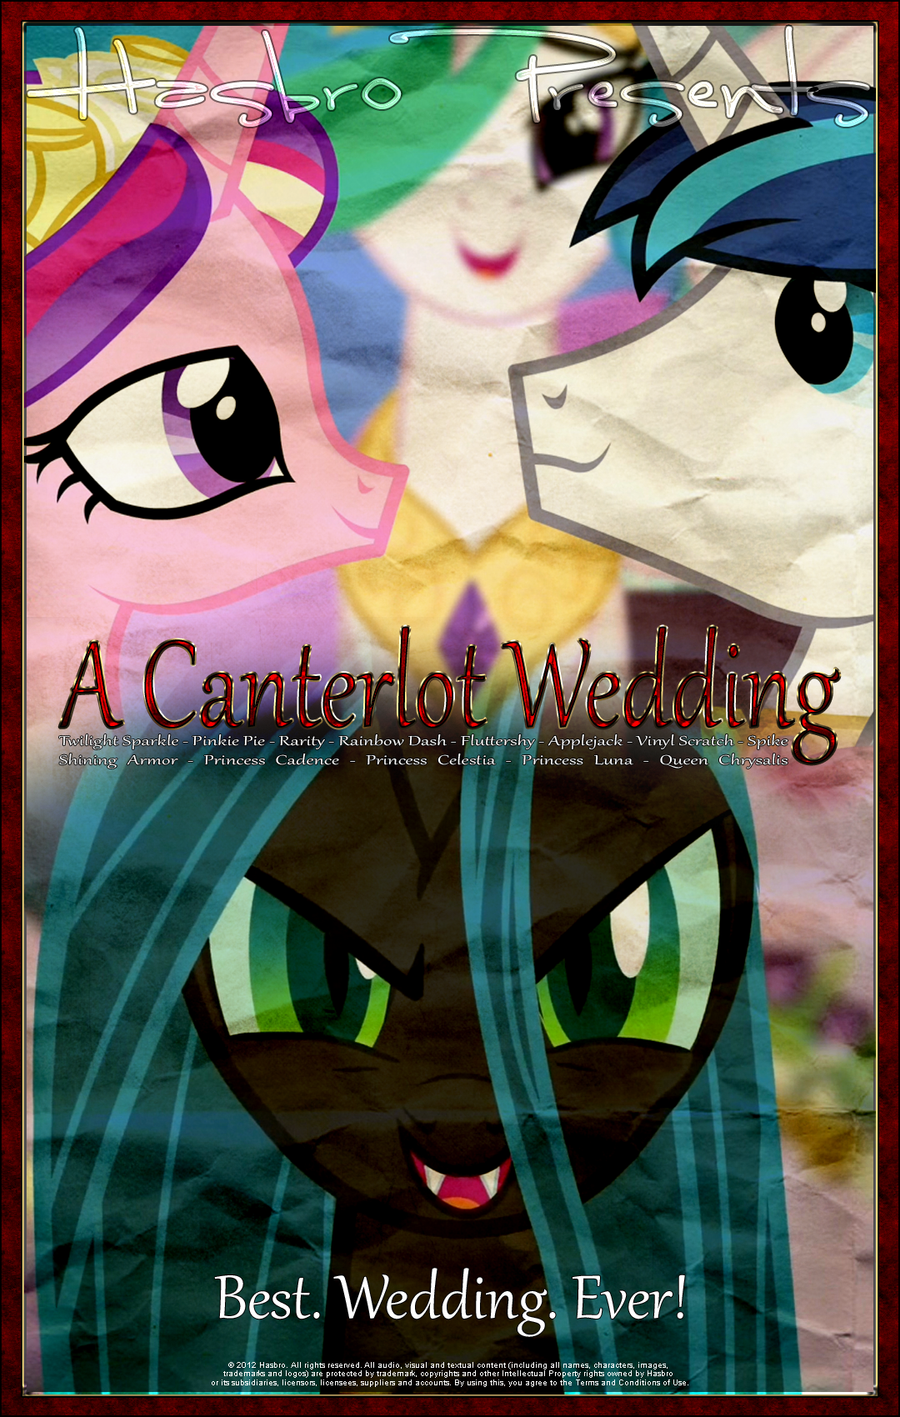 mlp___a_canterlot_wedding___movie_poster_by_pims1978-d53vhvf.png